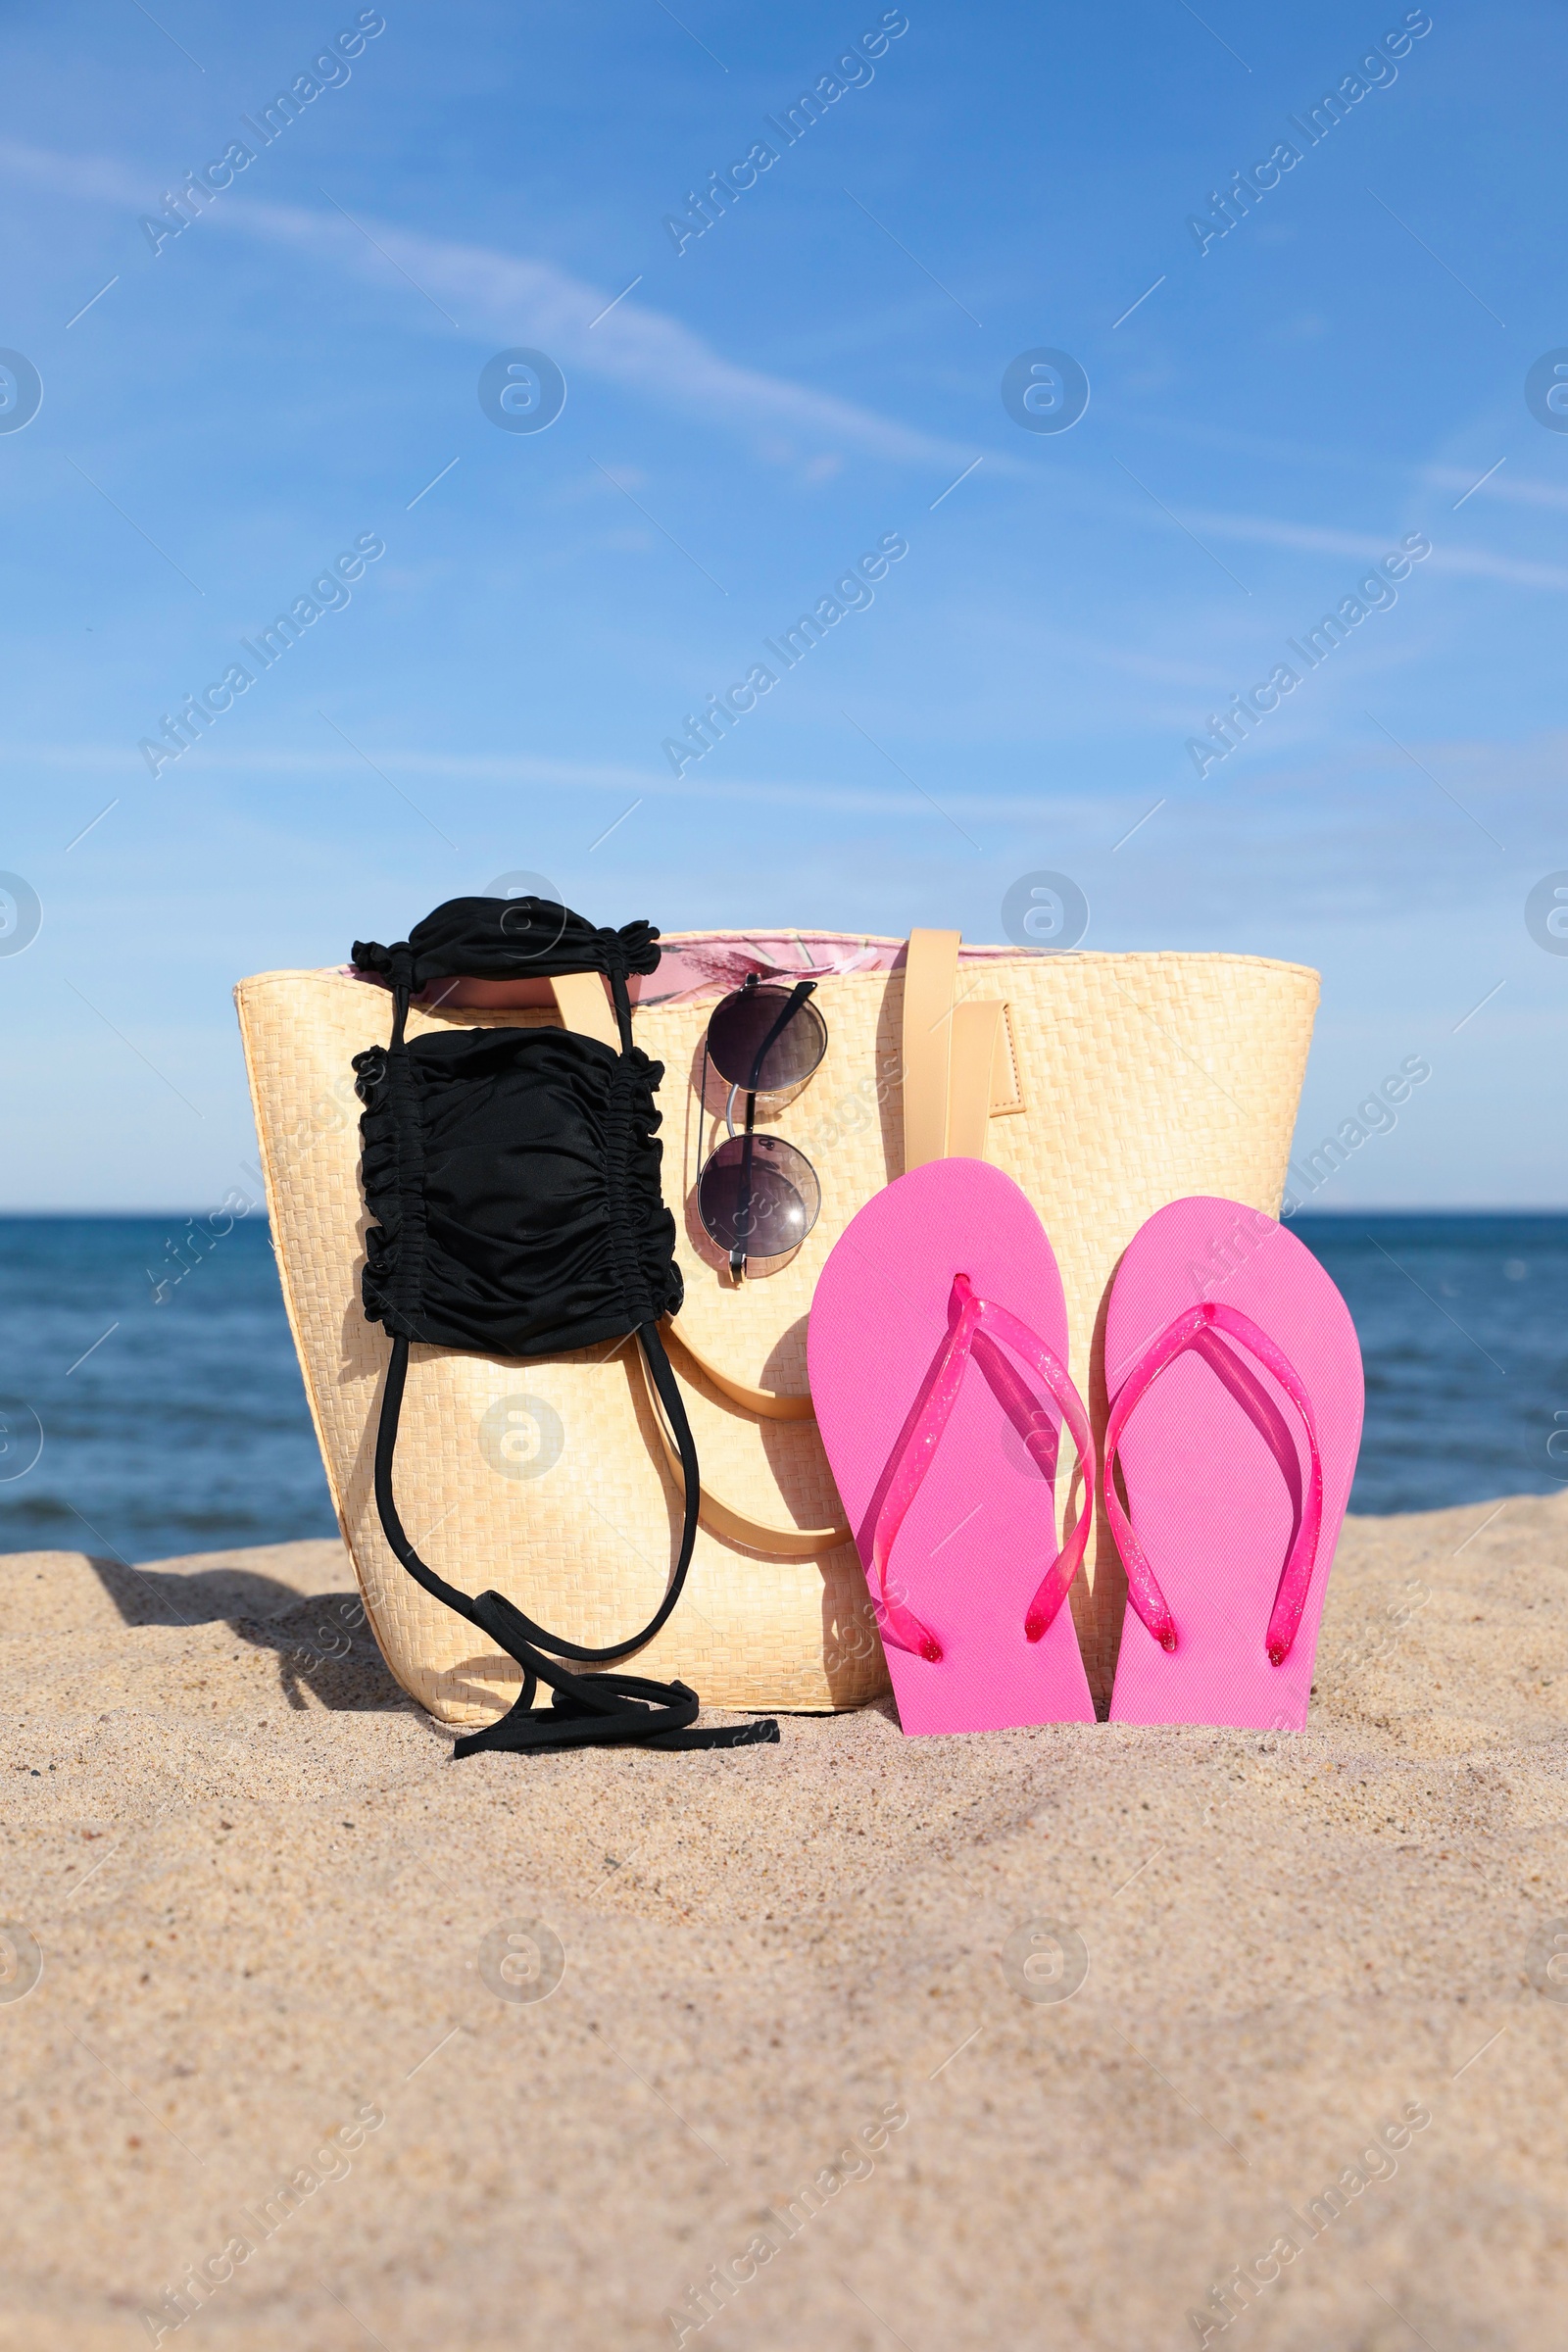 Photo of Summer bag with beach accessories on sand near sea